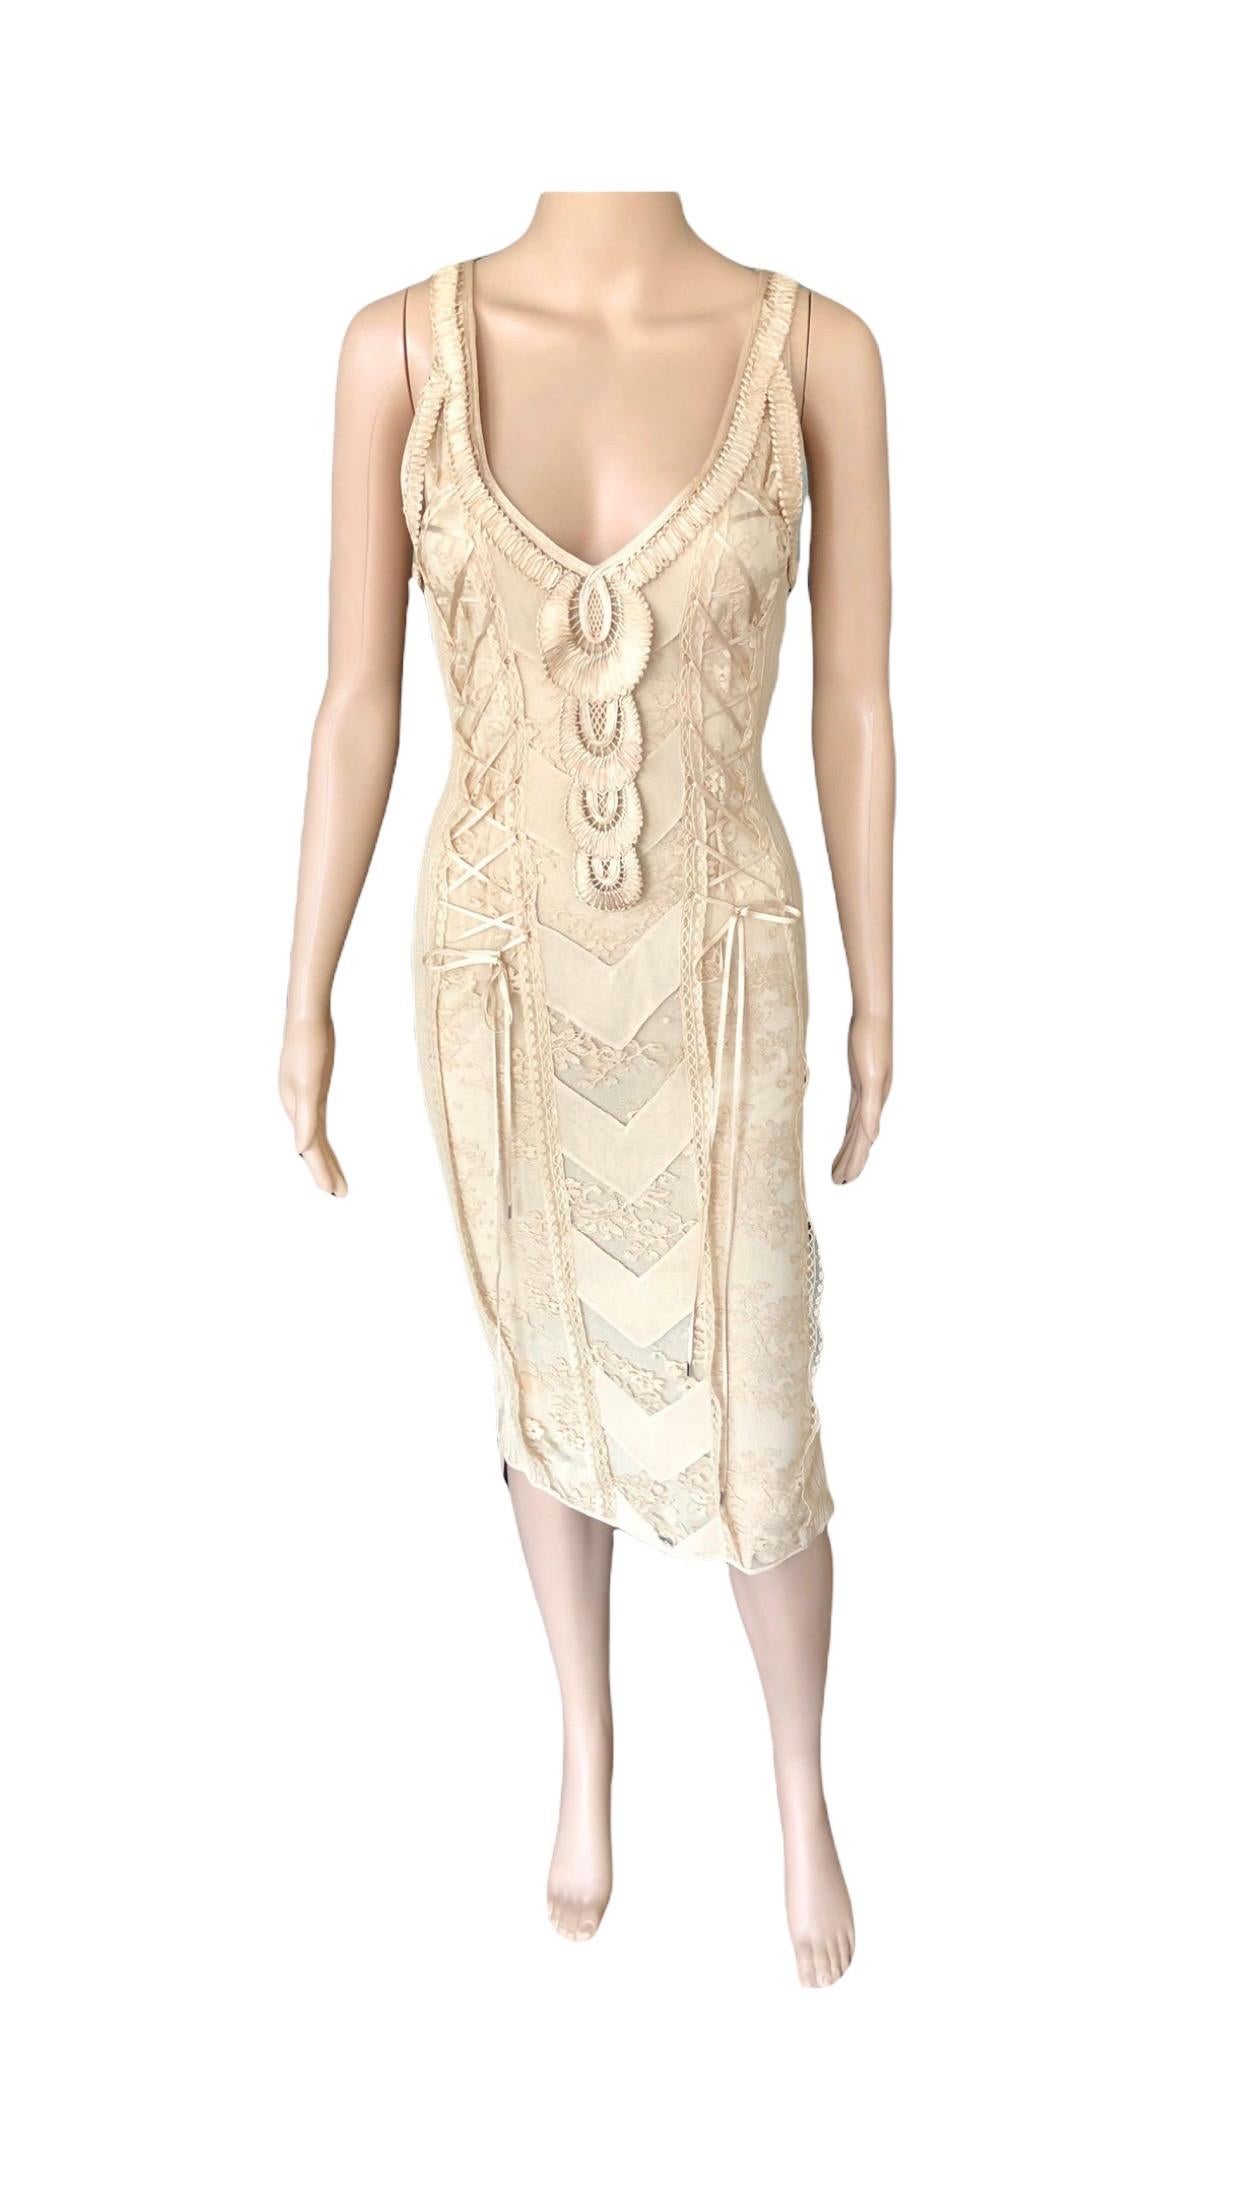 Women's Christian Dior by John Galliano S/S 2006 Sheer Lace Trimmed Corset Knit Dress